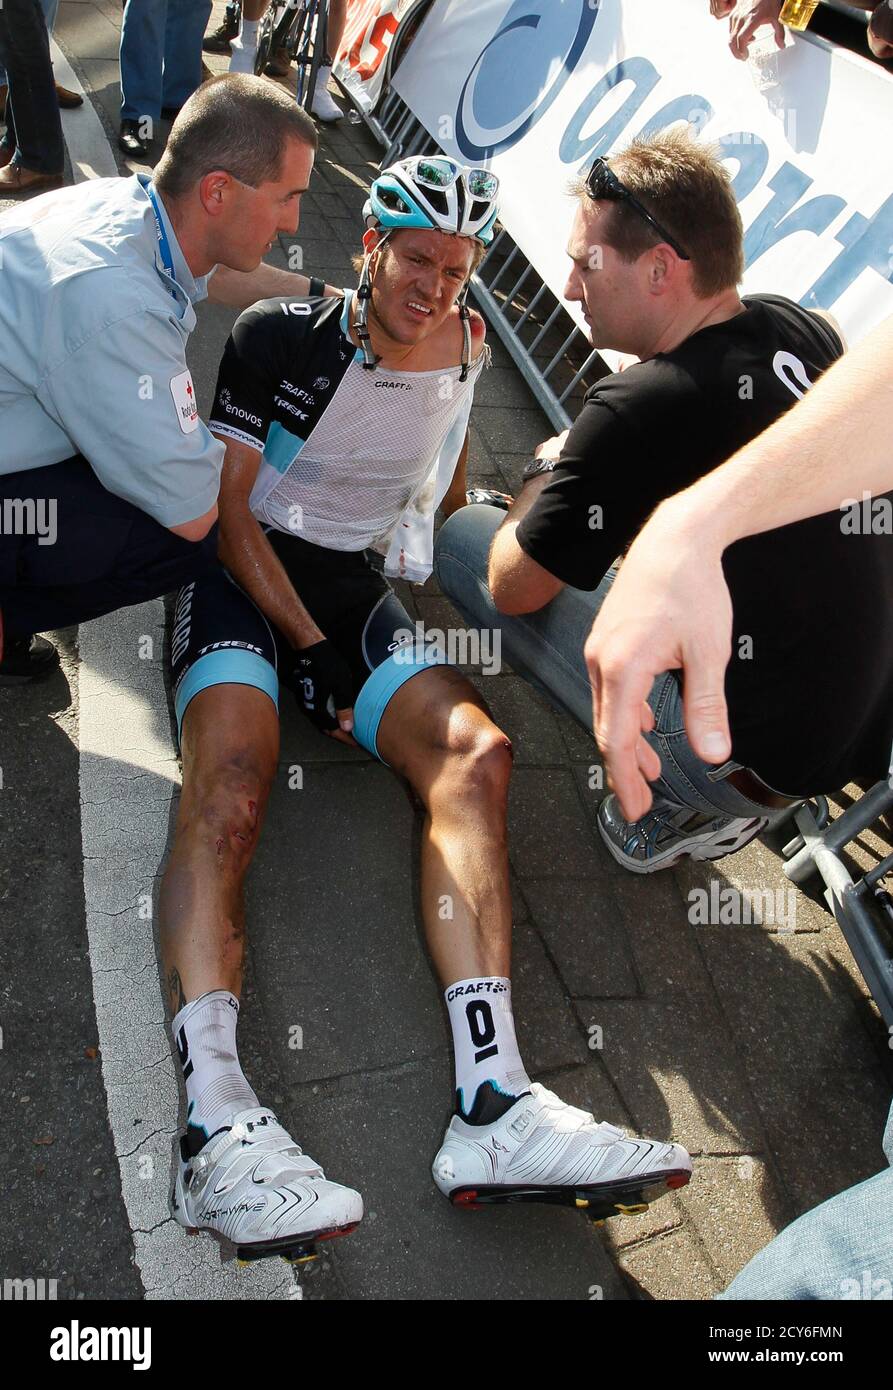 Leopard Trek rider Wouter Weylandt of Belgium is assisted by rescuers after crashing a few kilometres before the finishing line of the 99th Scheldeprijs/Grand Prix de l'Escaut cycling race in Schoten April 6, 2011. Weyland has been transported to the hospital, organisers of the race said. REUTERS/Yves Herman (BELGIUM - Tags: SPORT CYCLING) Stock Photo